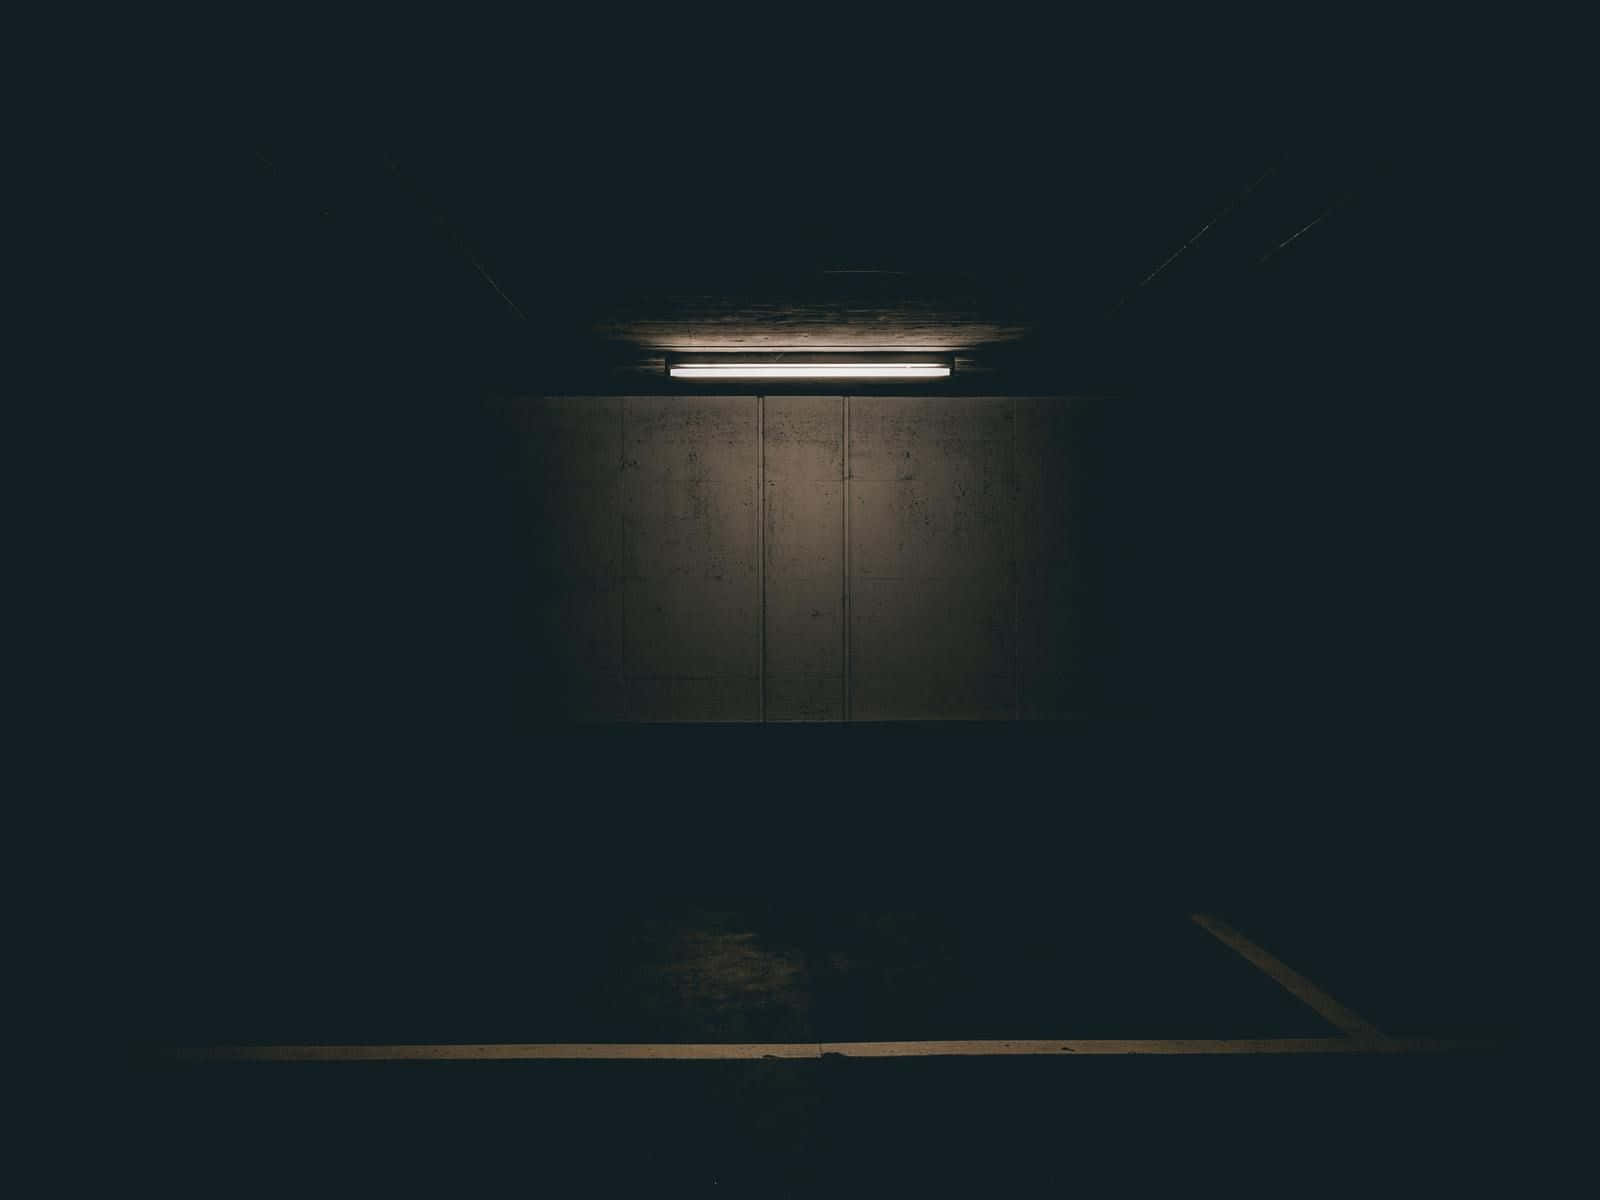 A Dark Parking Garage With A Light Shining On It